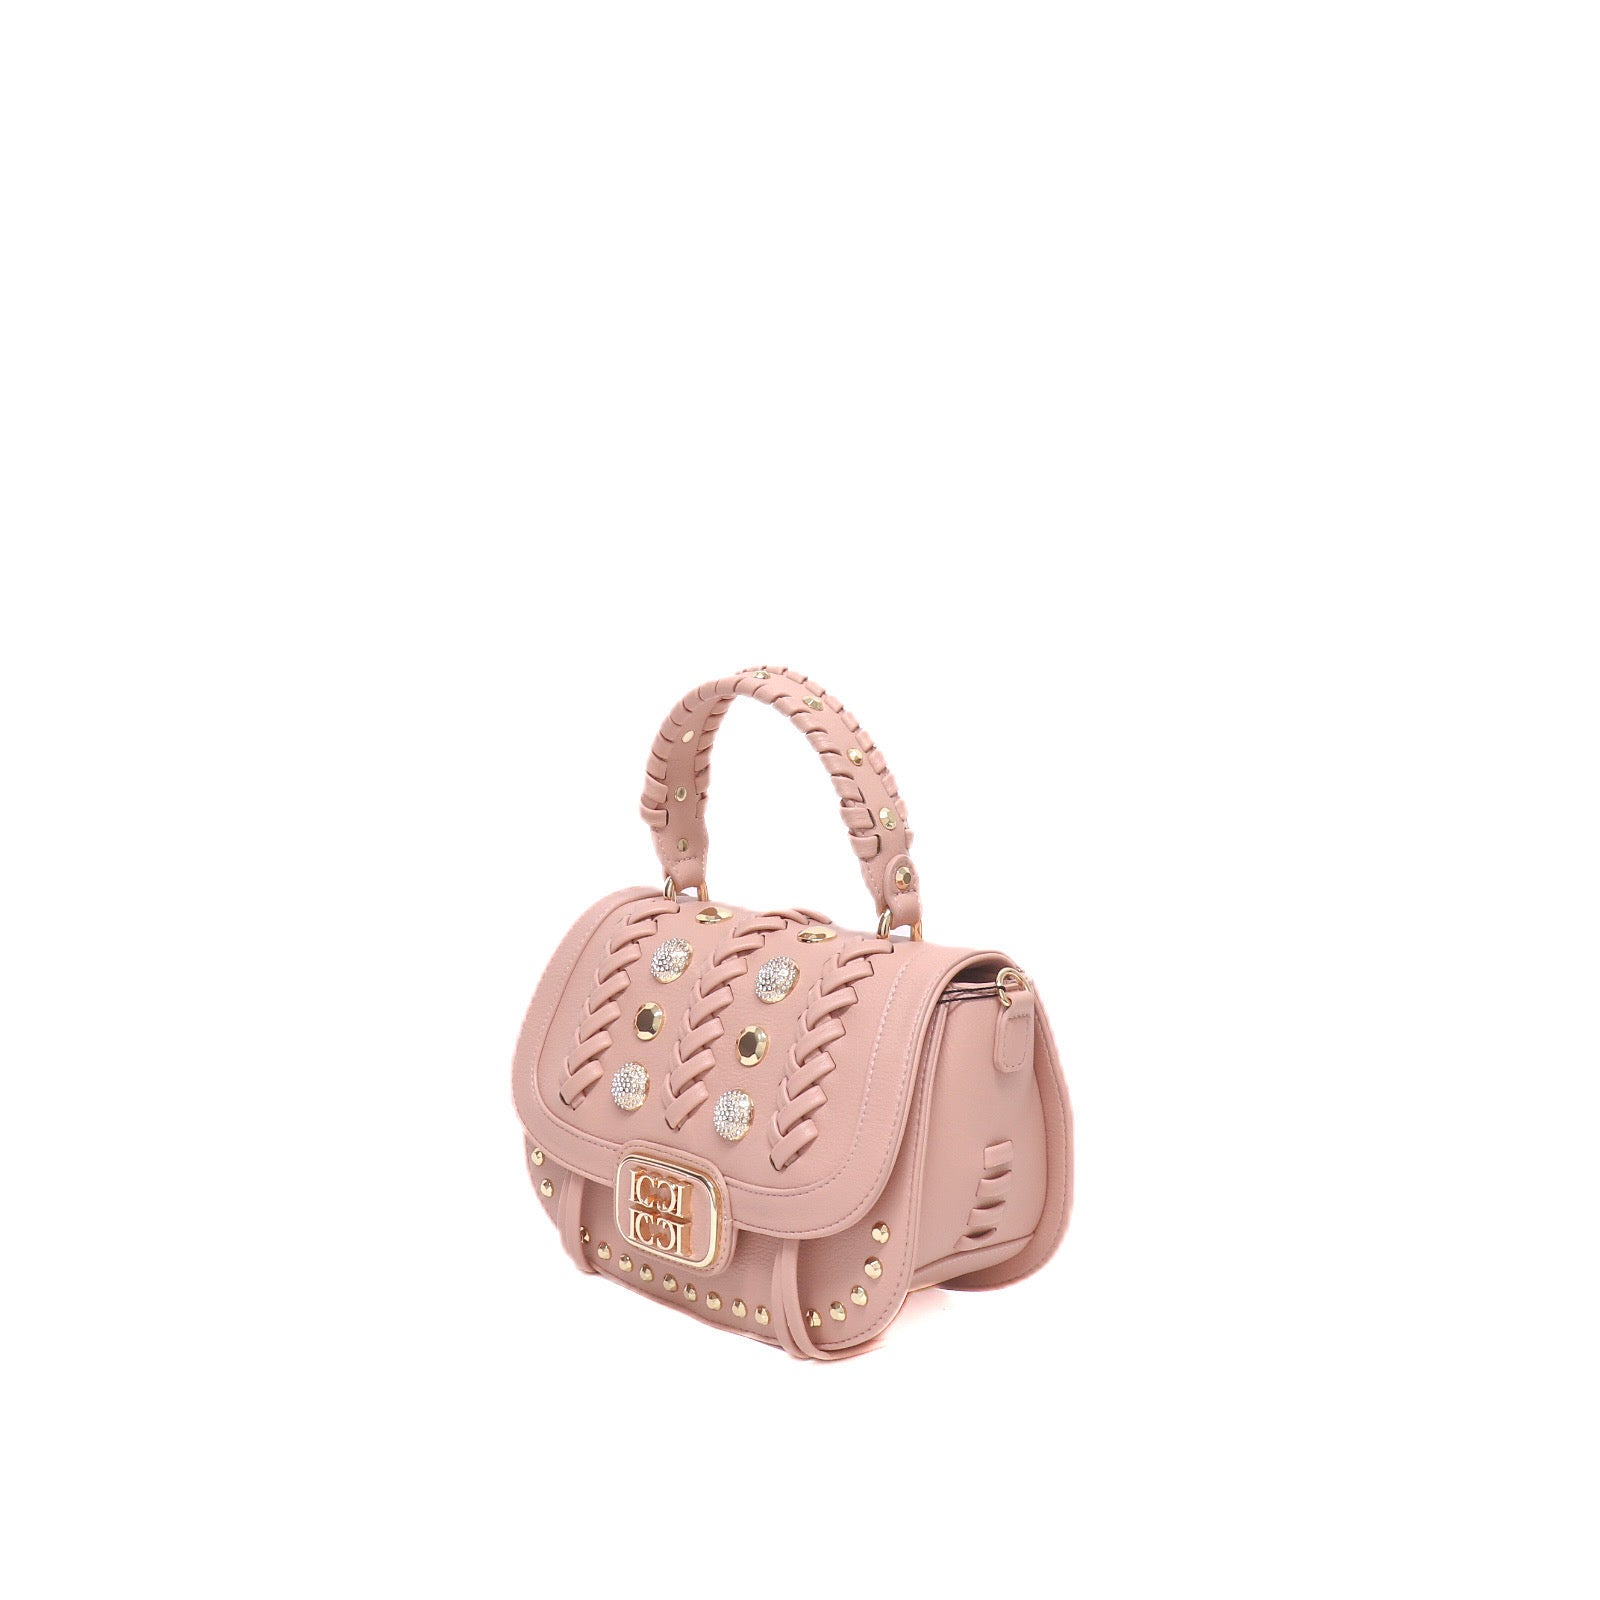 The Carrie Bag Luminescence Bag